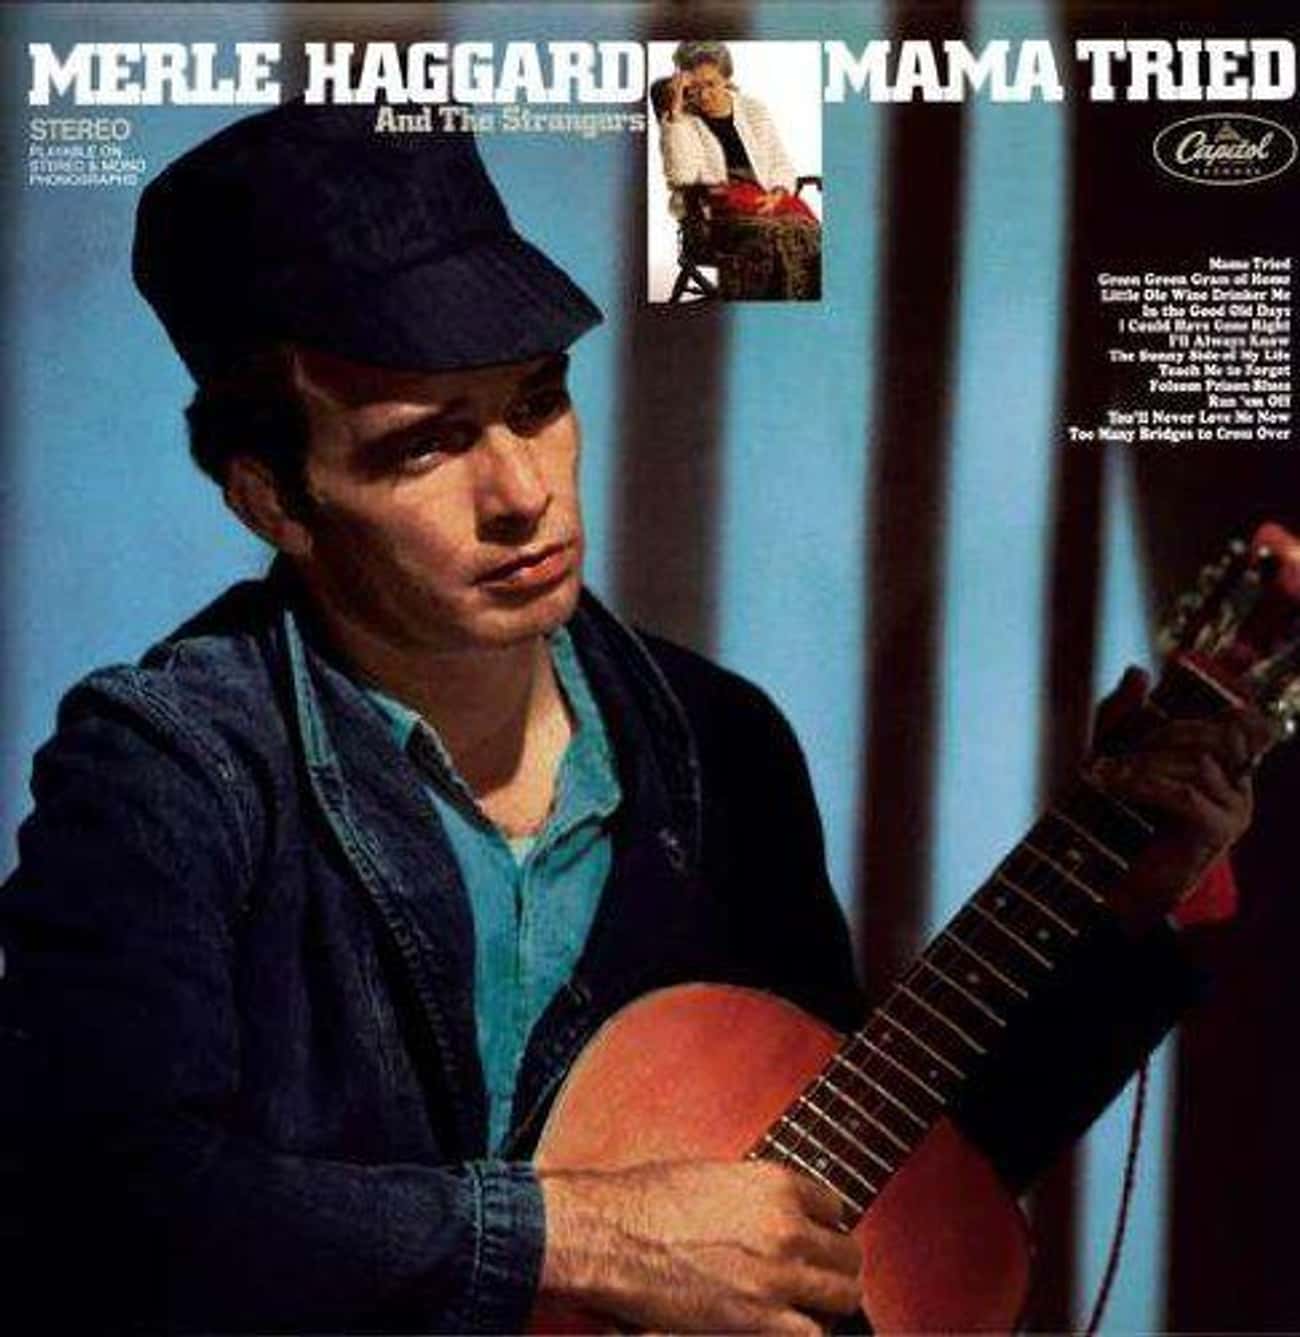 Merle Haggard Was A 20-Year-Old Inmate At Johnny Cash's San Quentin Prison Concert